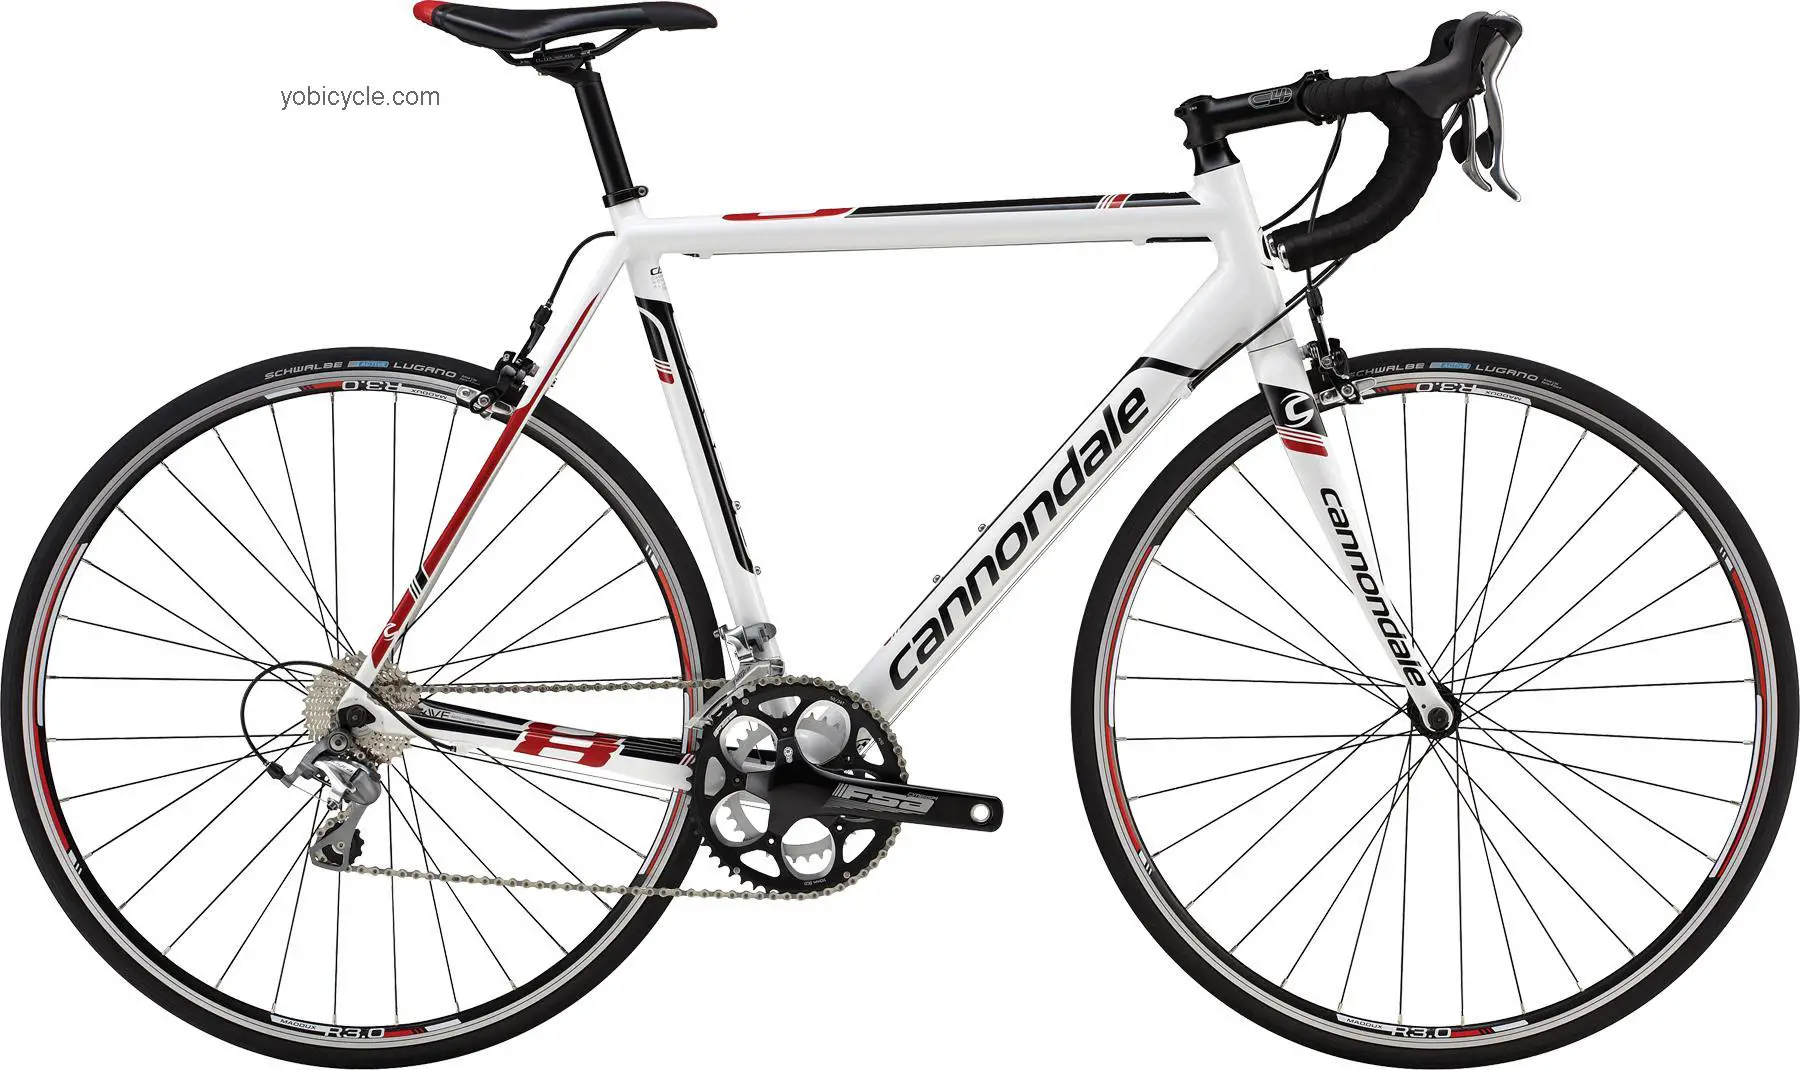 Cannondale CAAD8 6 Tiagra Compact 2014 comparison online with competitors